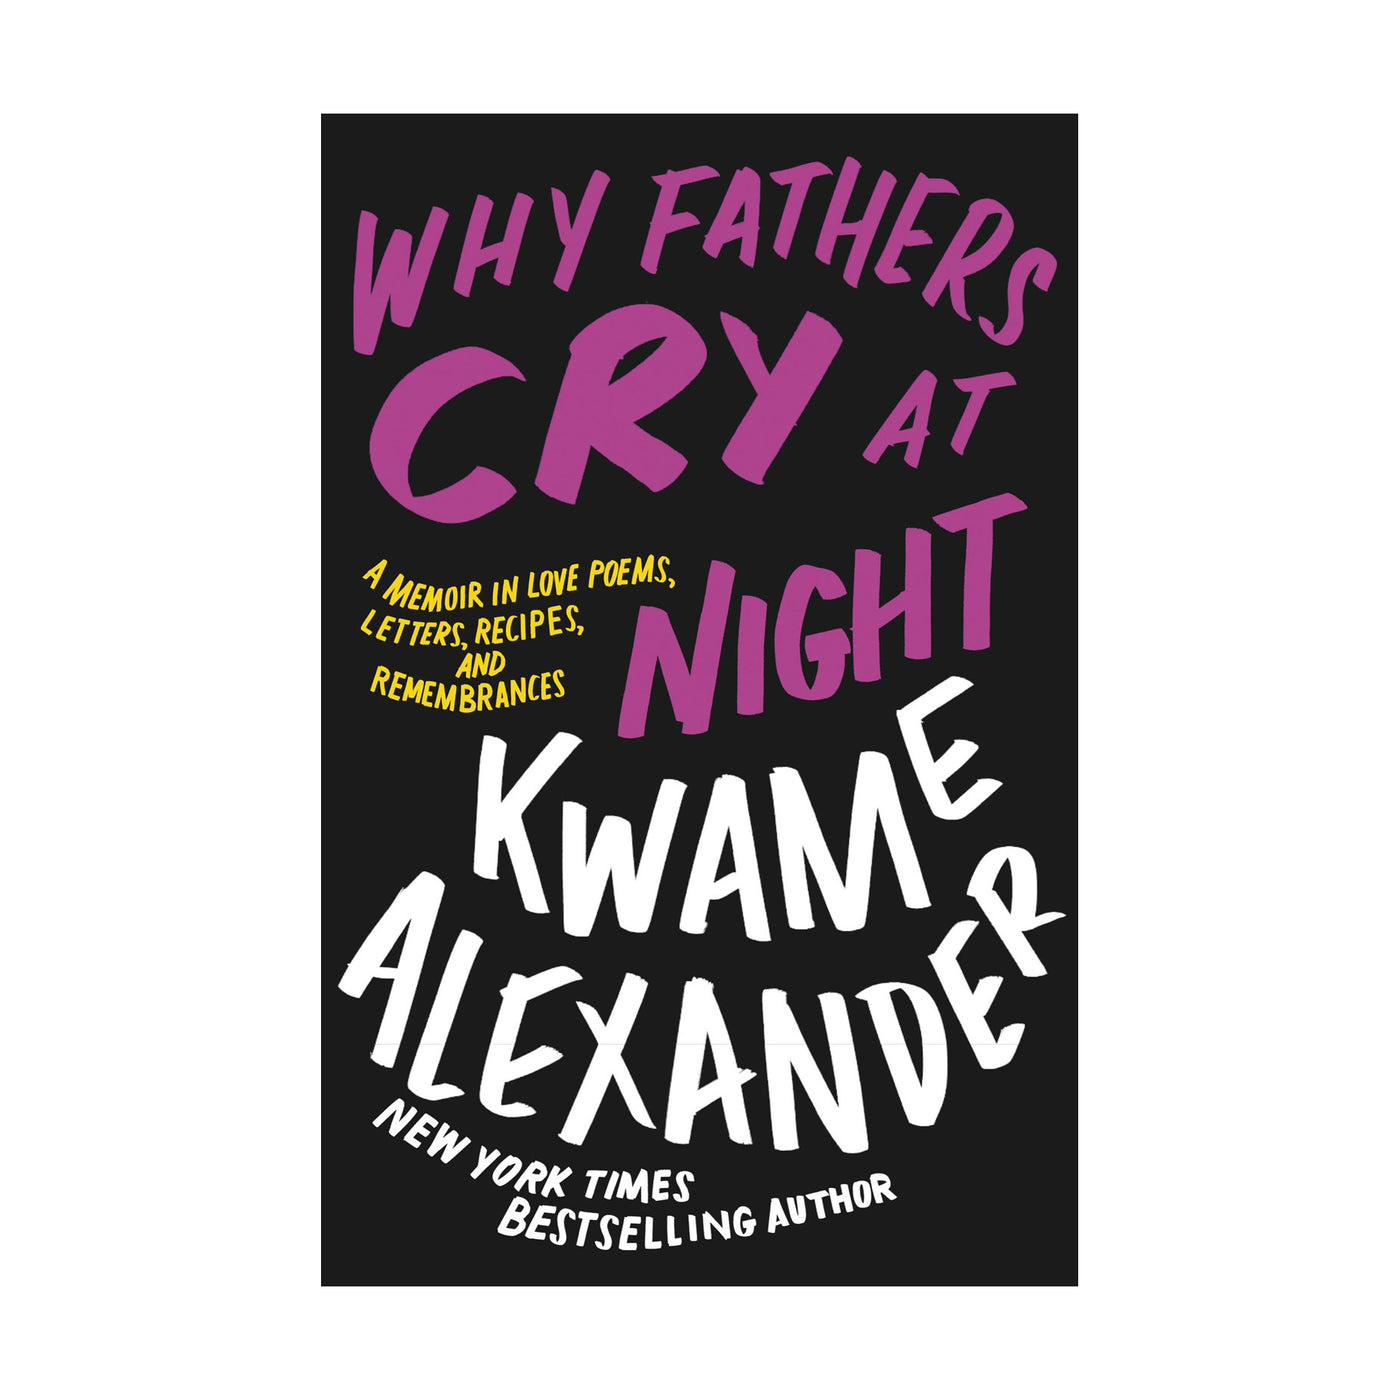 Why Fathers Cry at Night